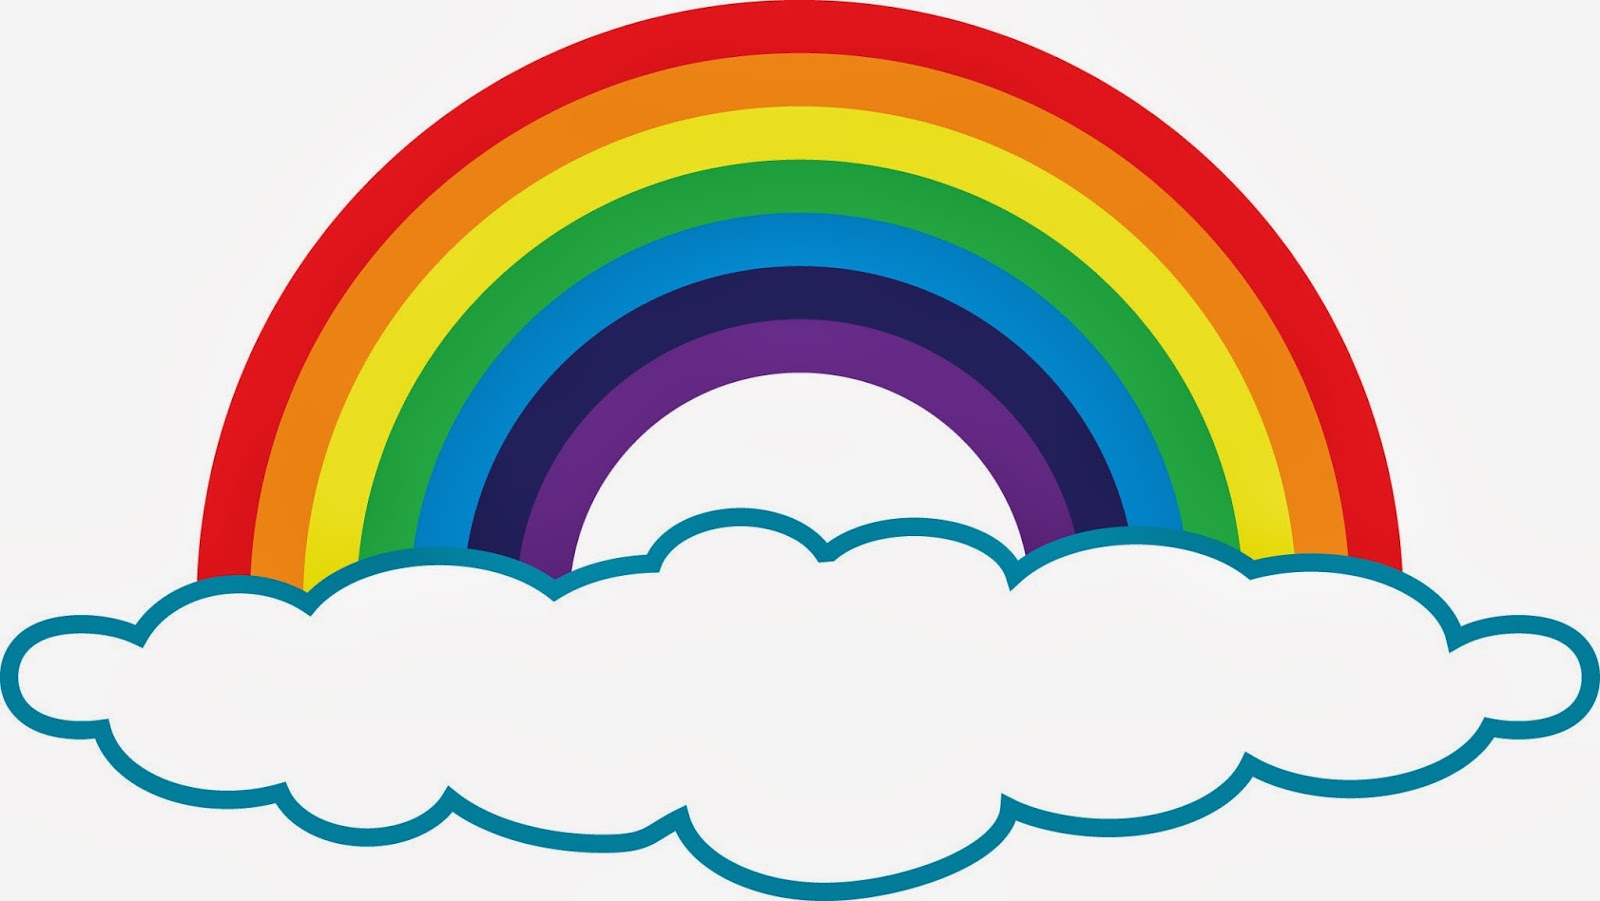 Rainbow with Clouds Clip Art